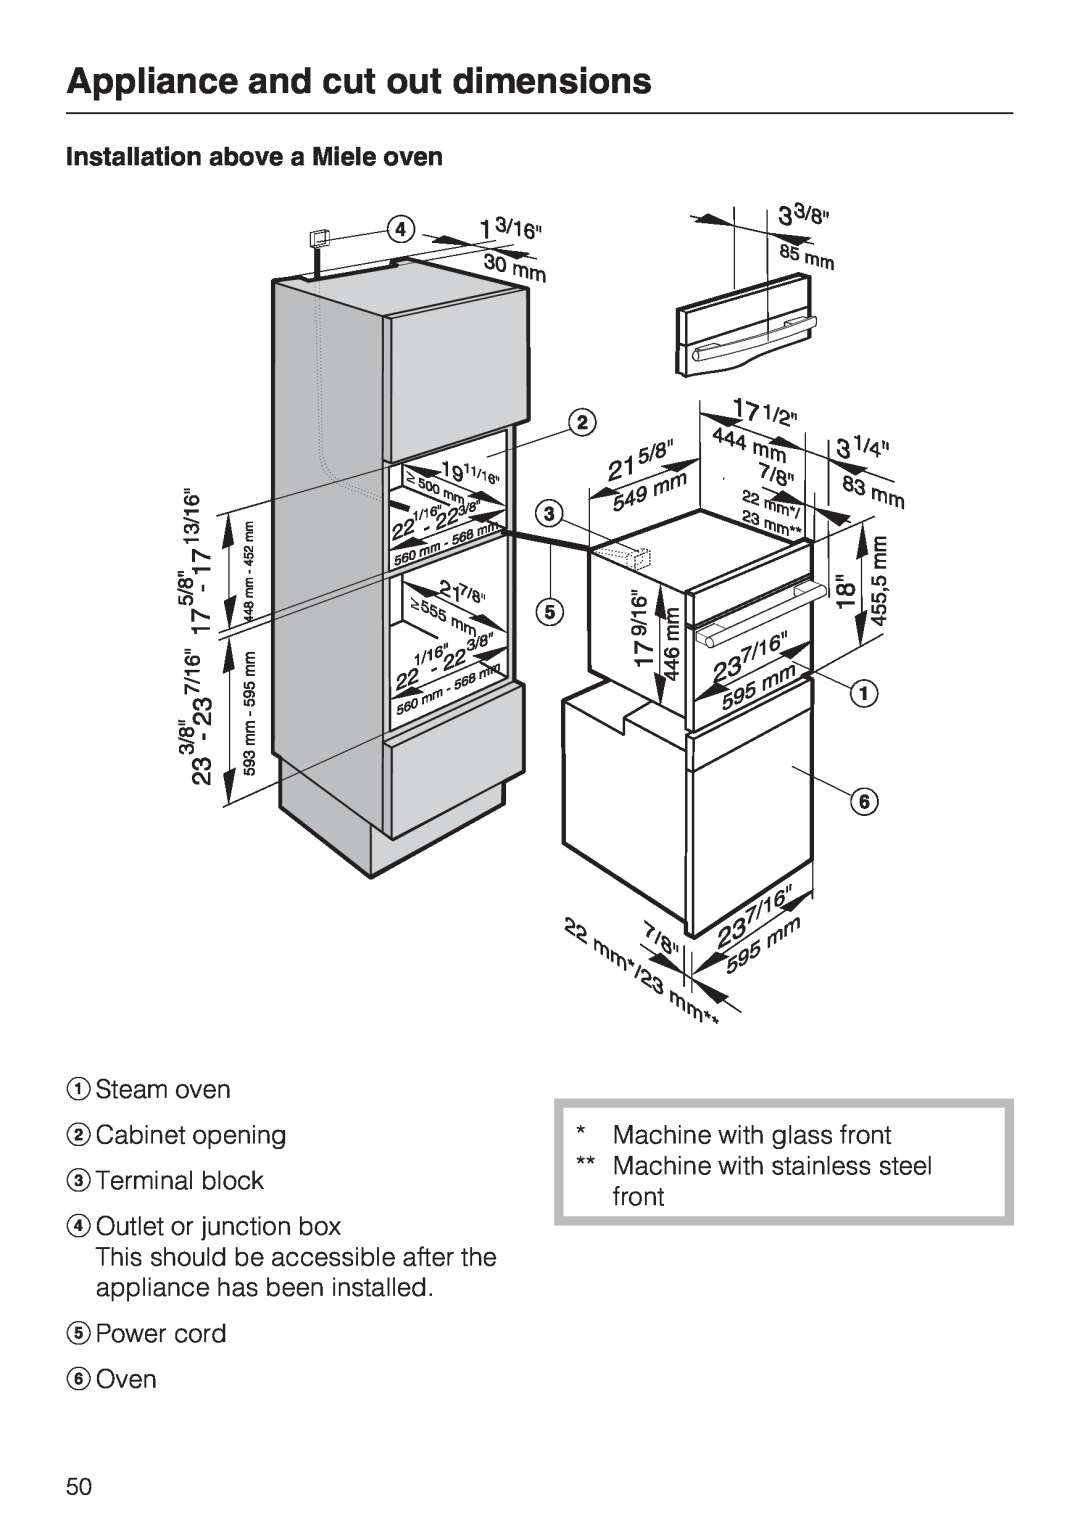 Miele DG4082 Appliance and cut out dimensions, Installation above a Miele oven, Steam oven Cabinet opening Terminal block 